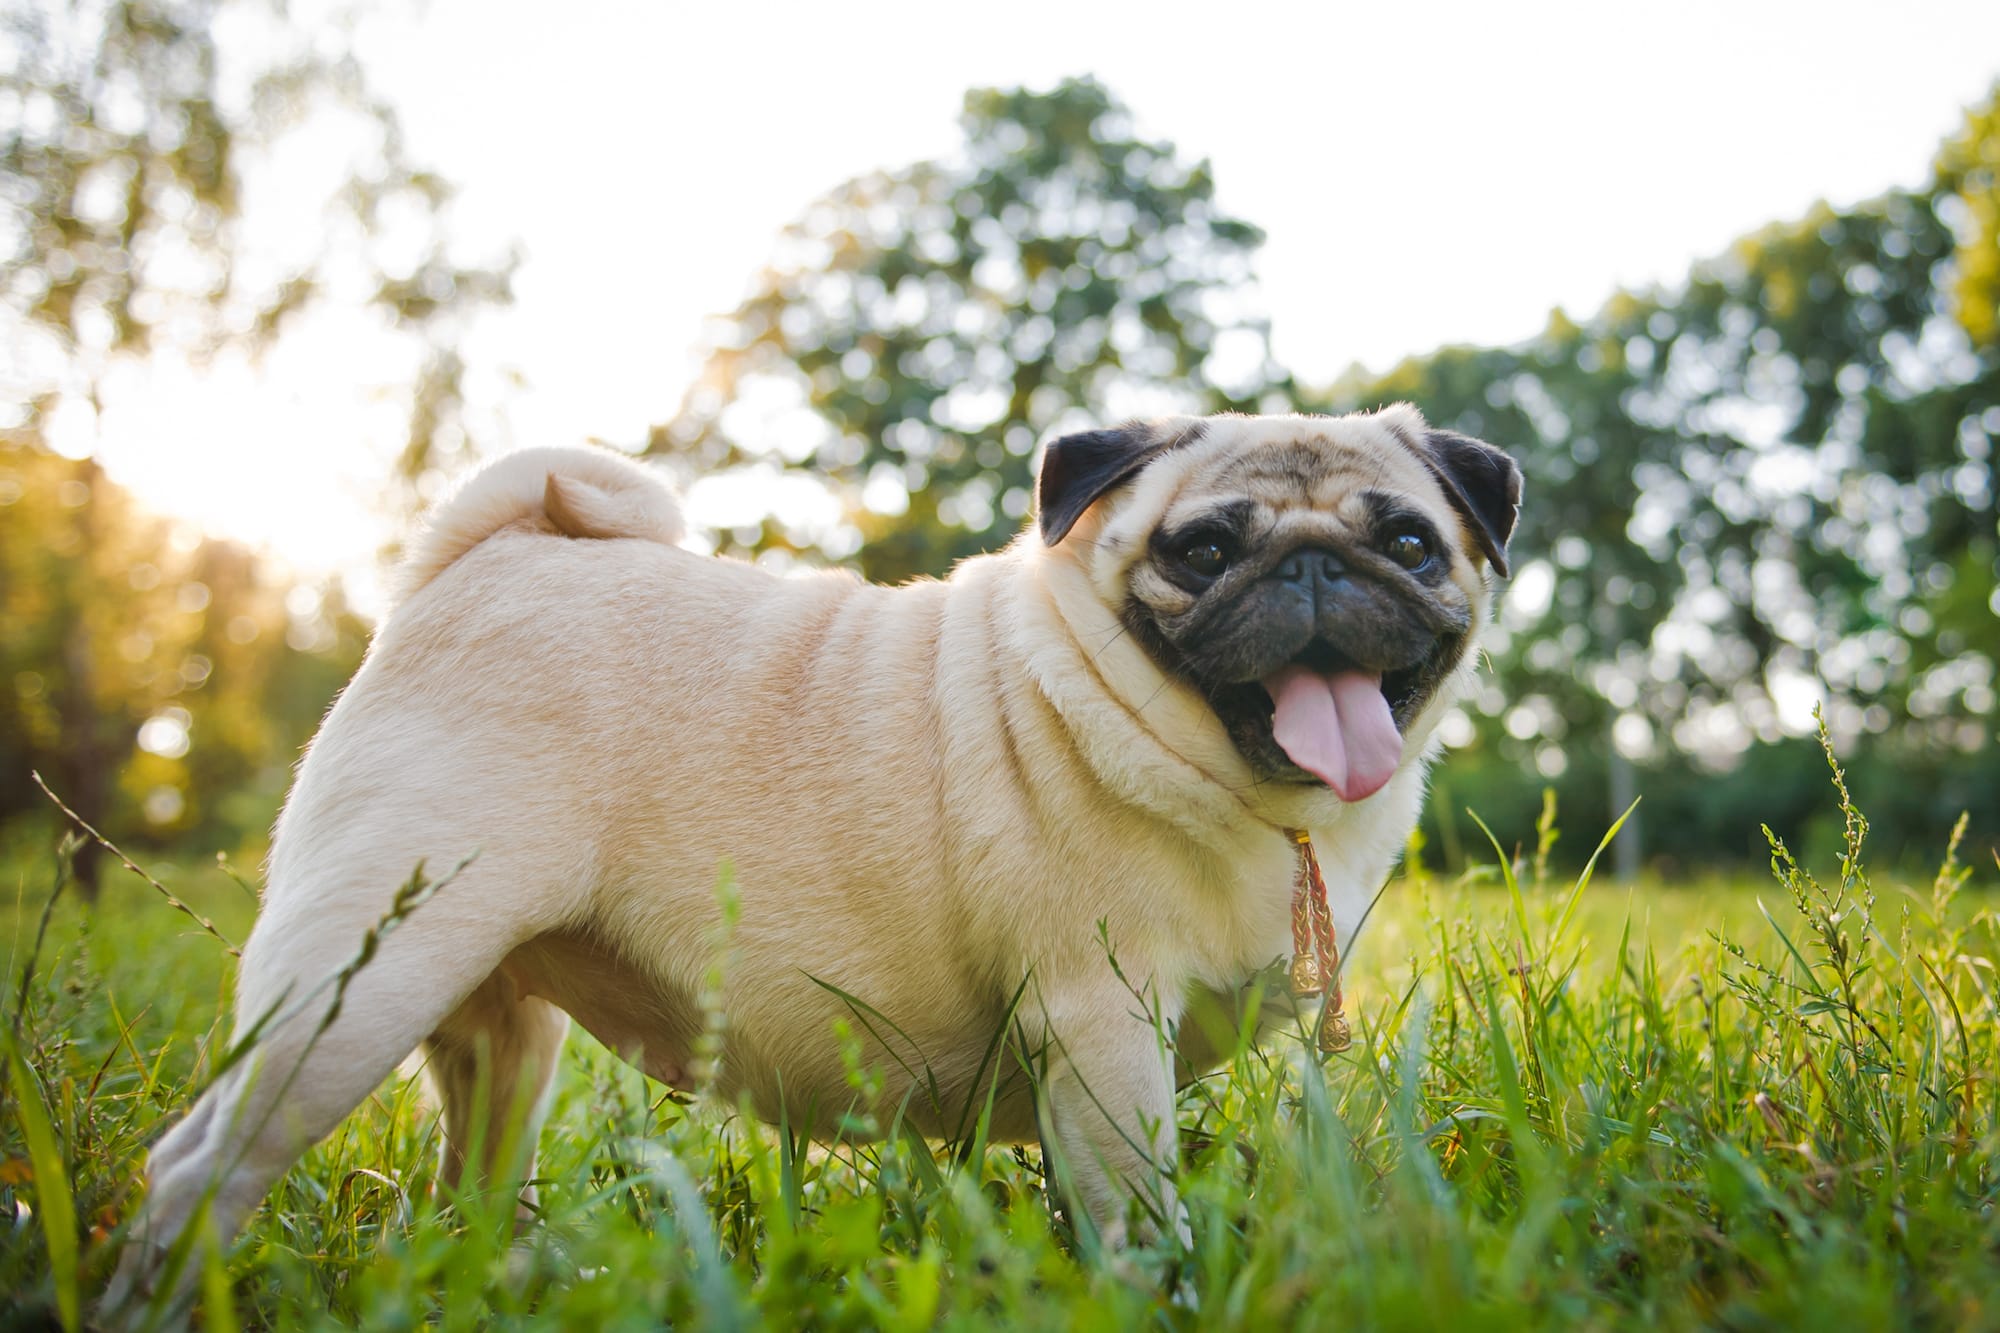 Dog Weight Management: Gaining and Losing Pounds Safely - Nom Nom